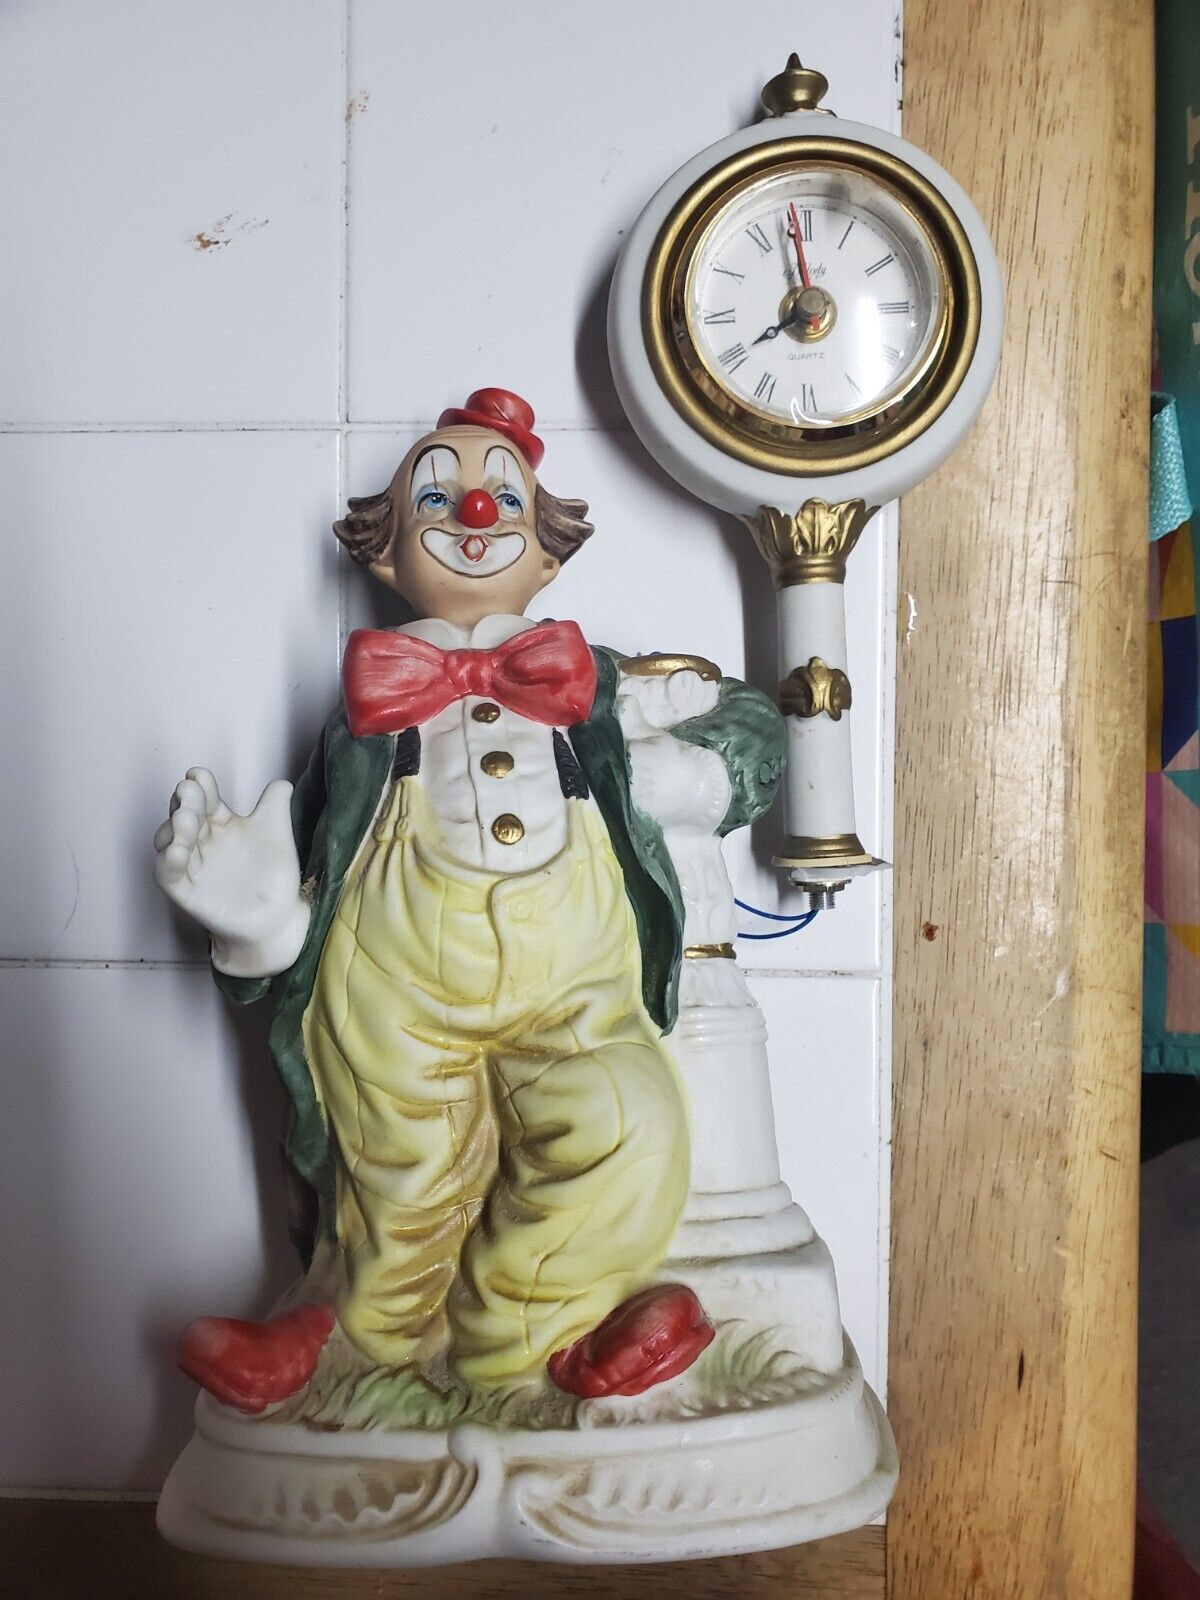 Melody In Motion Clown Clock Works But Clock Needs To Be Glued Back On